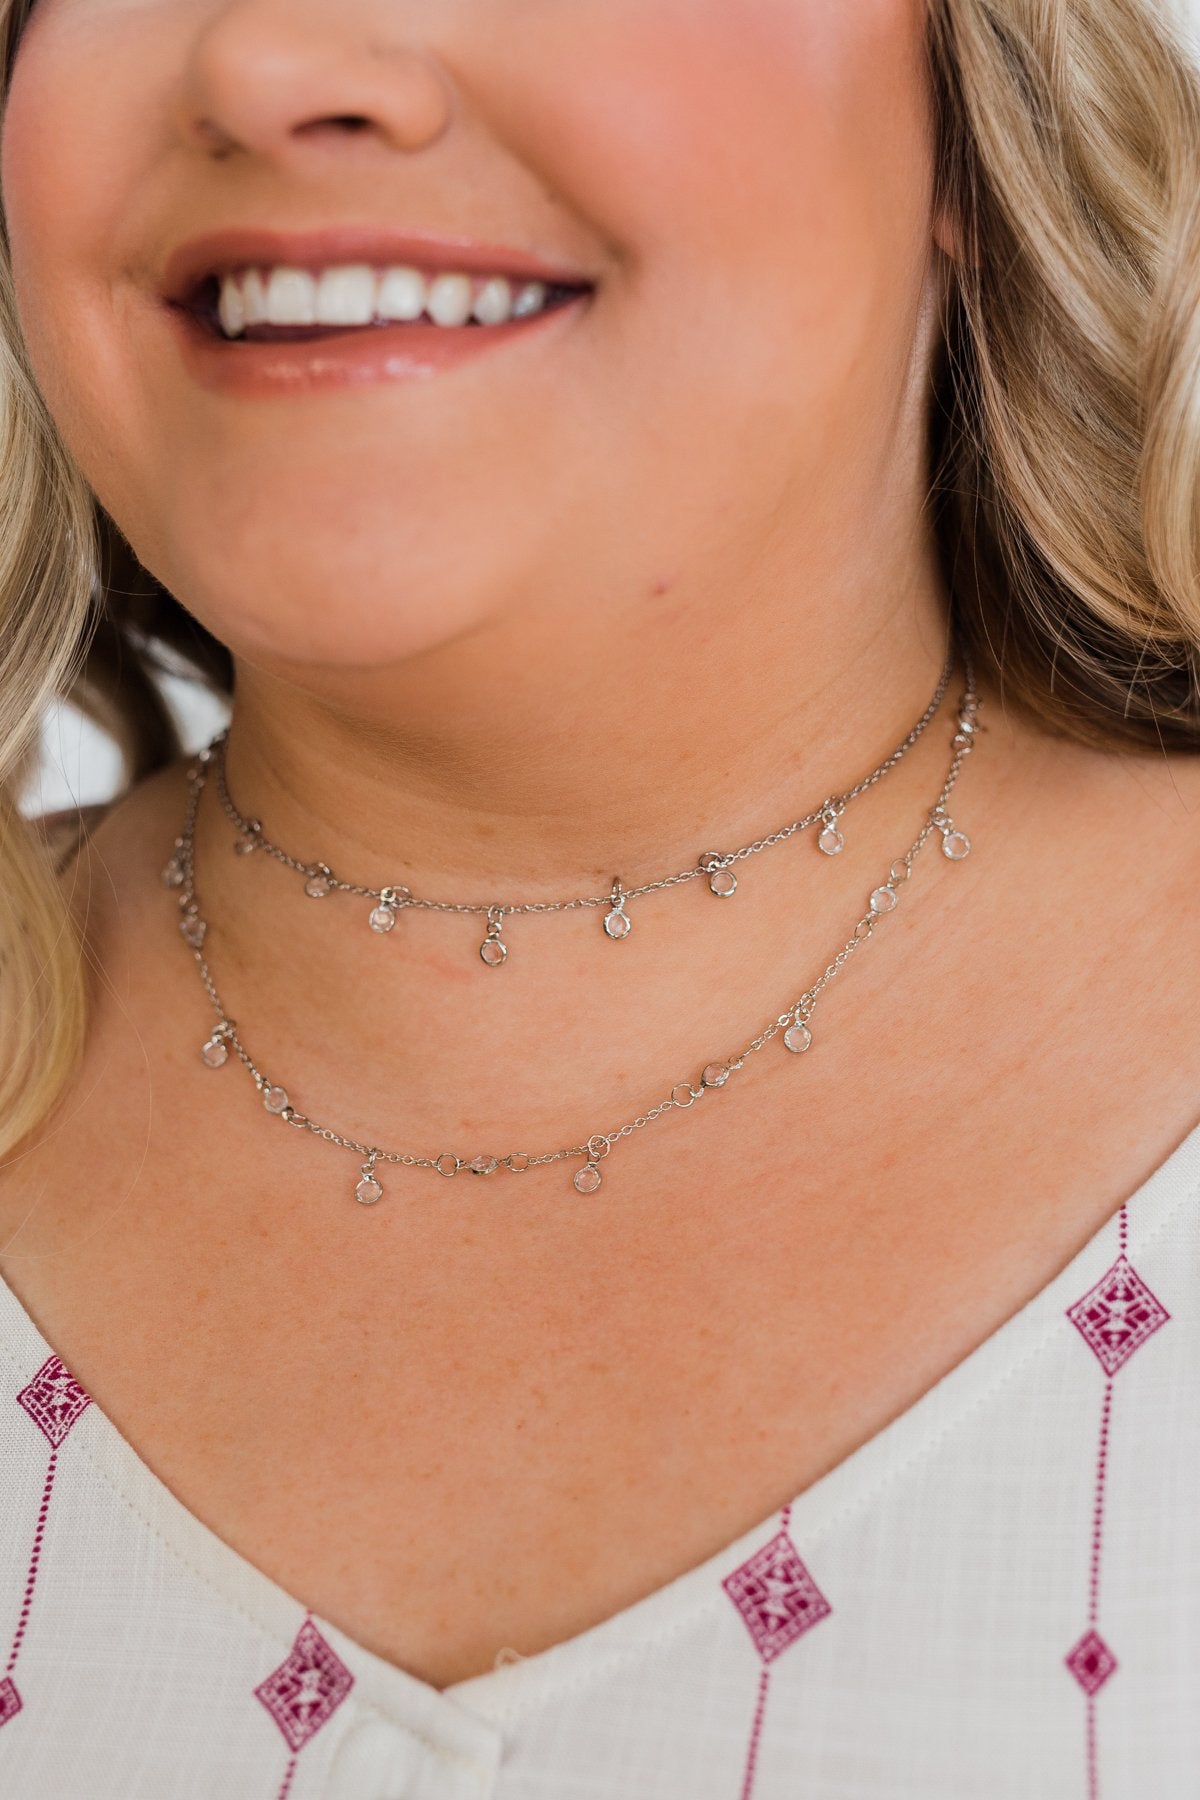 Clear Jewel 2 Tier Necklace- Silver